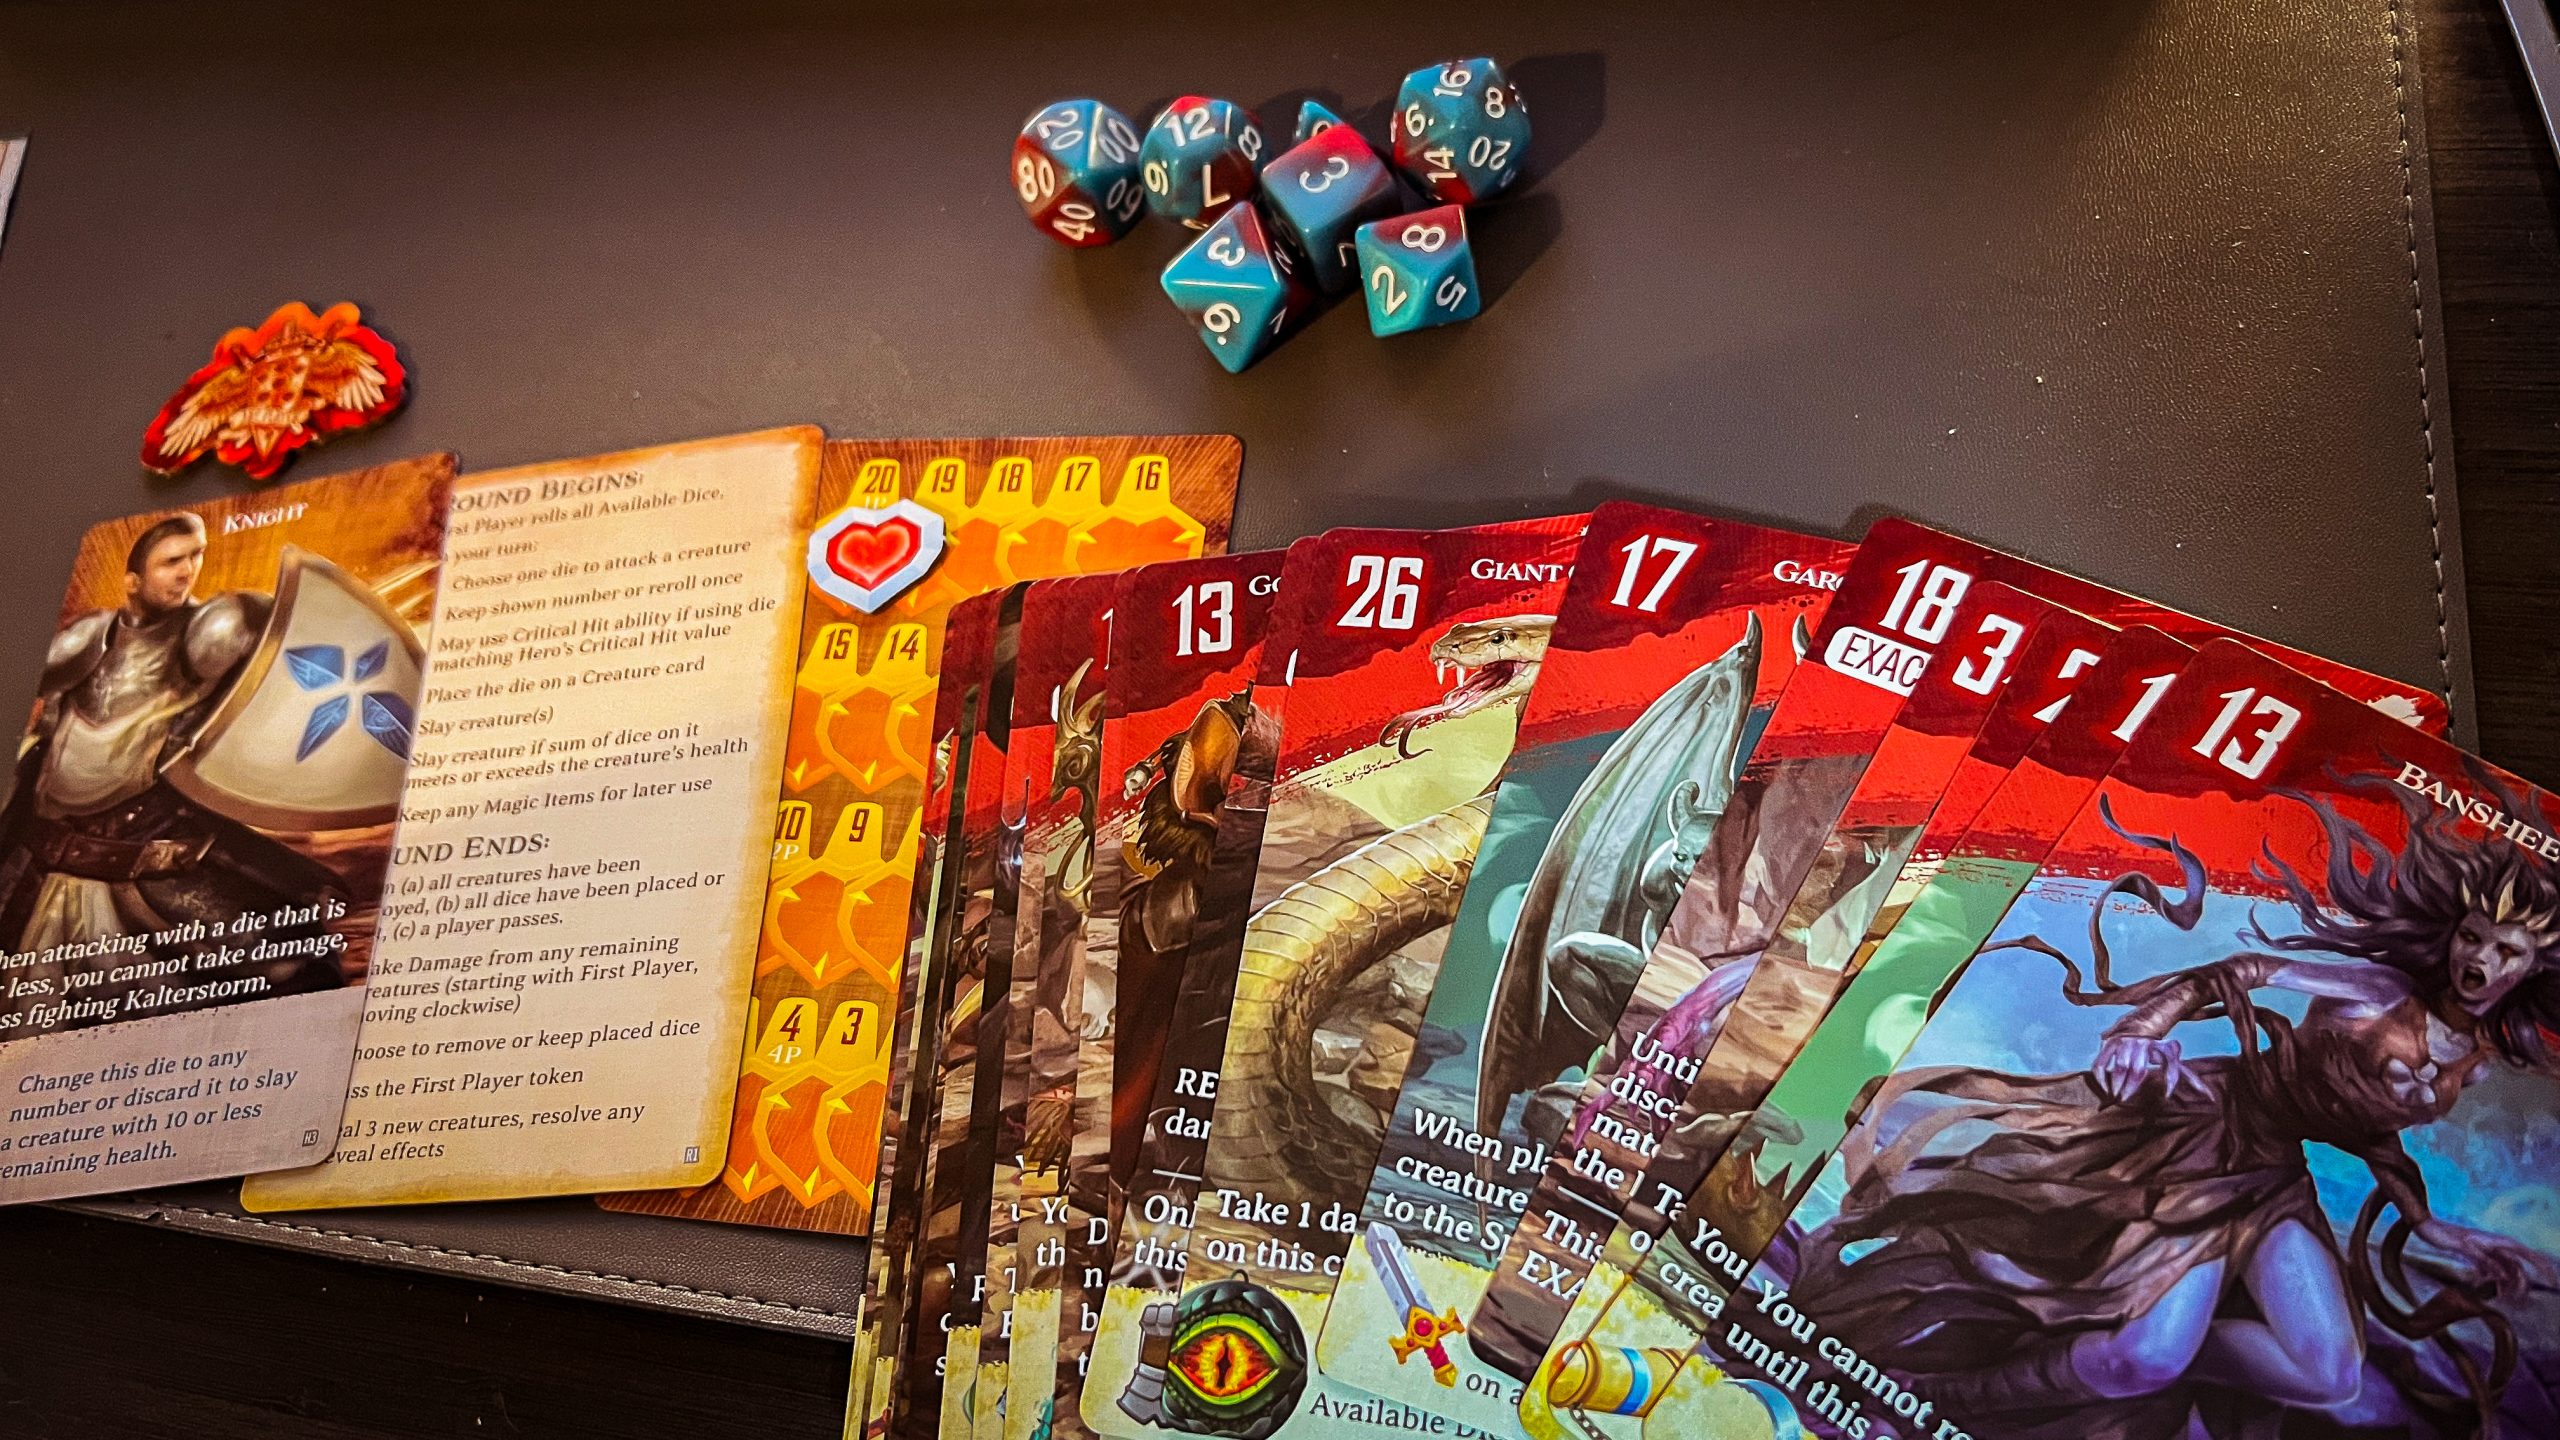 An image of the dice conquest game, showing creature cards, dice, instructions